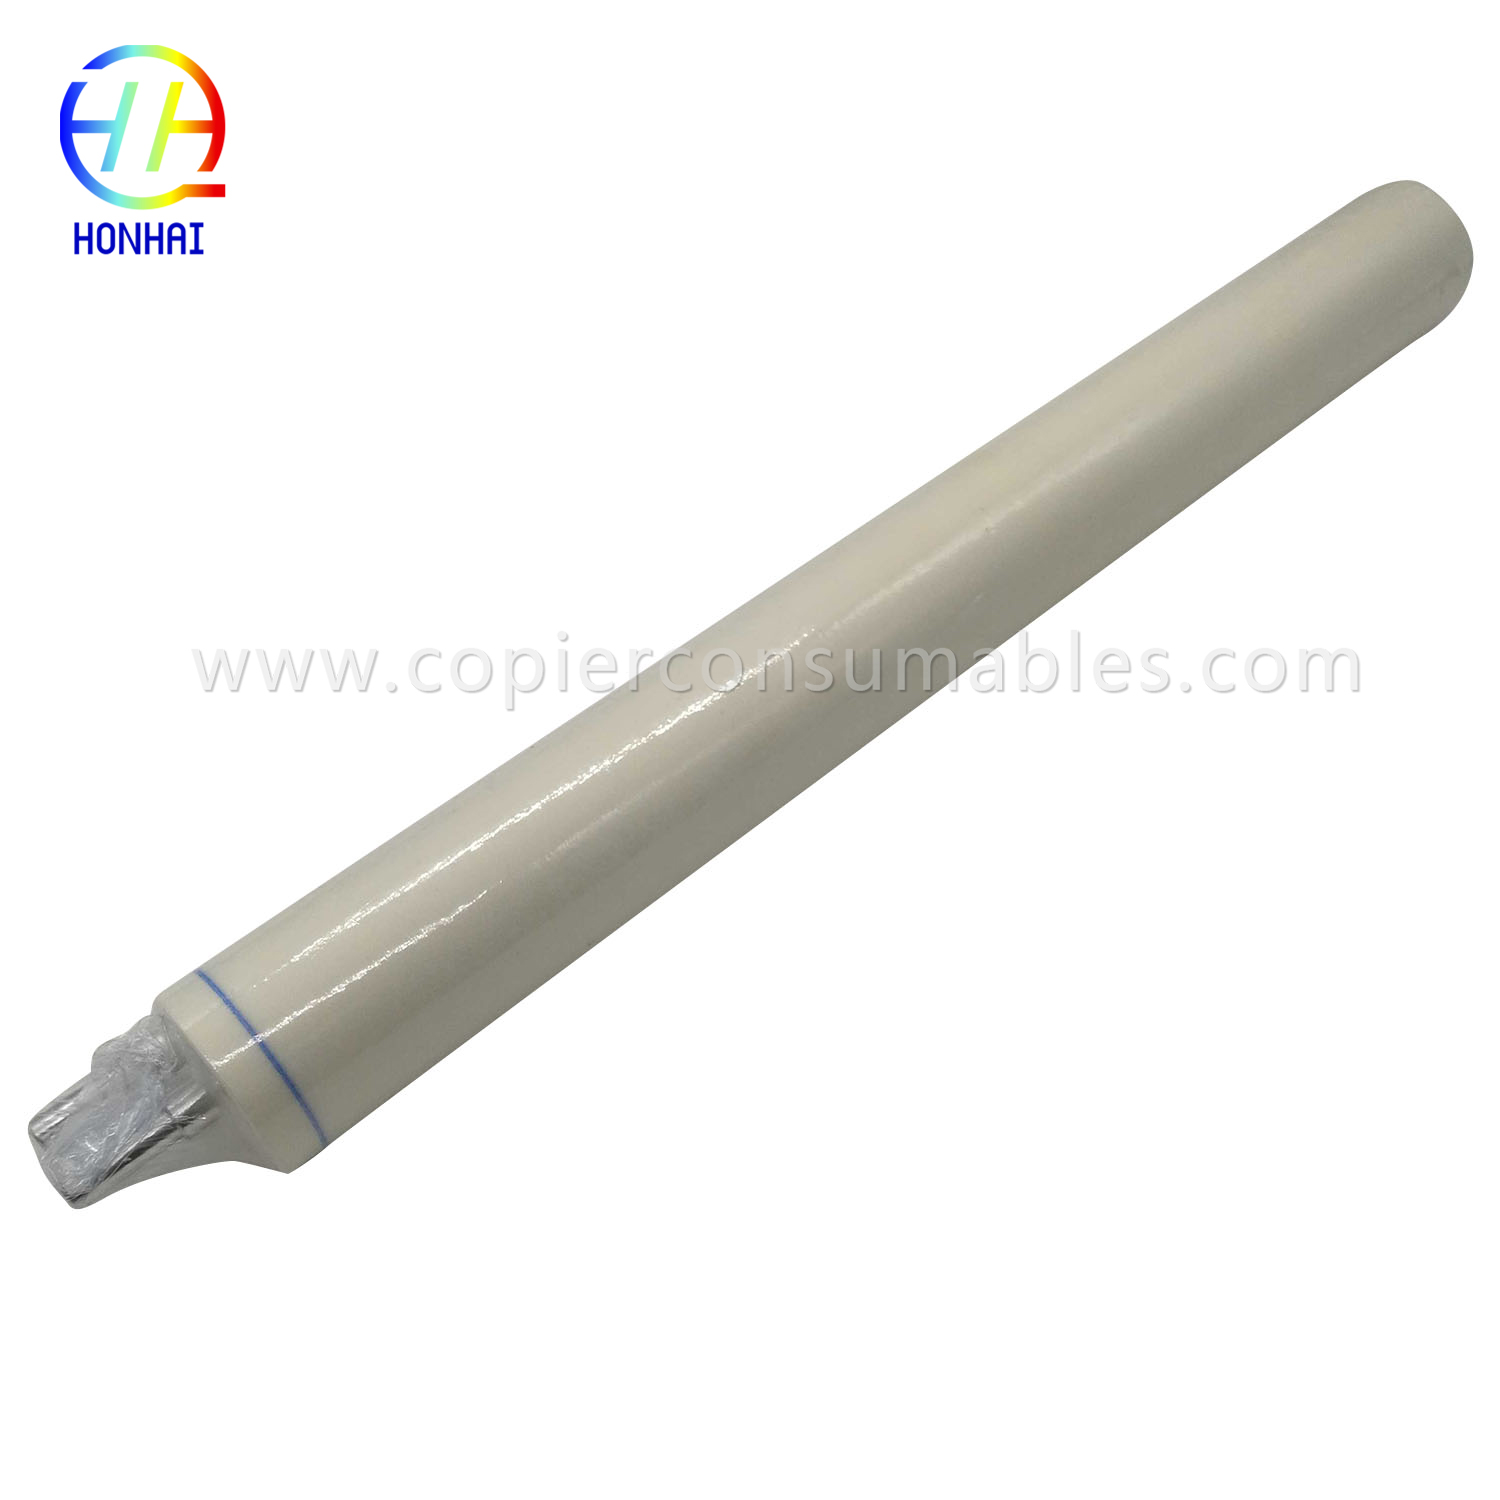 Top Quality Small Electric Rollers - Web Roller for Toshiba Es550 650 810 6la23055000 – HONHAI